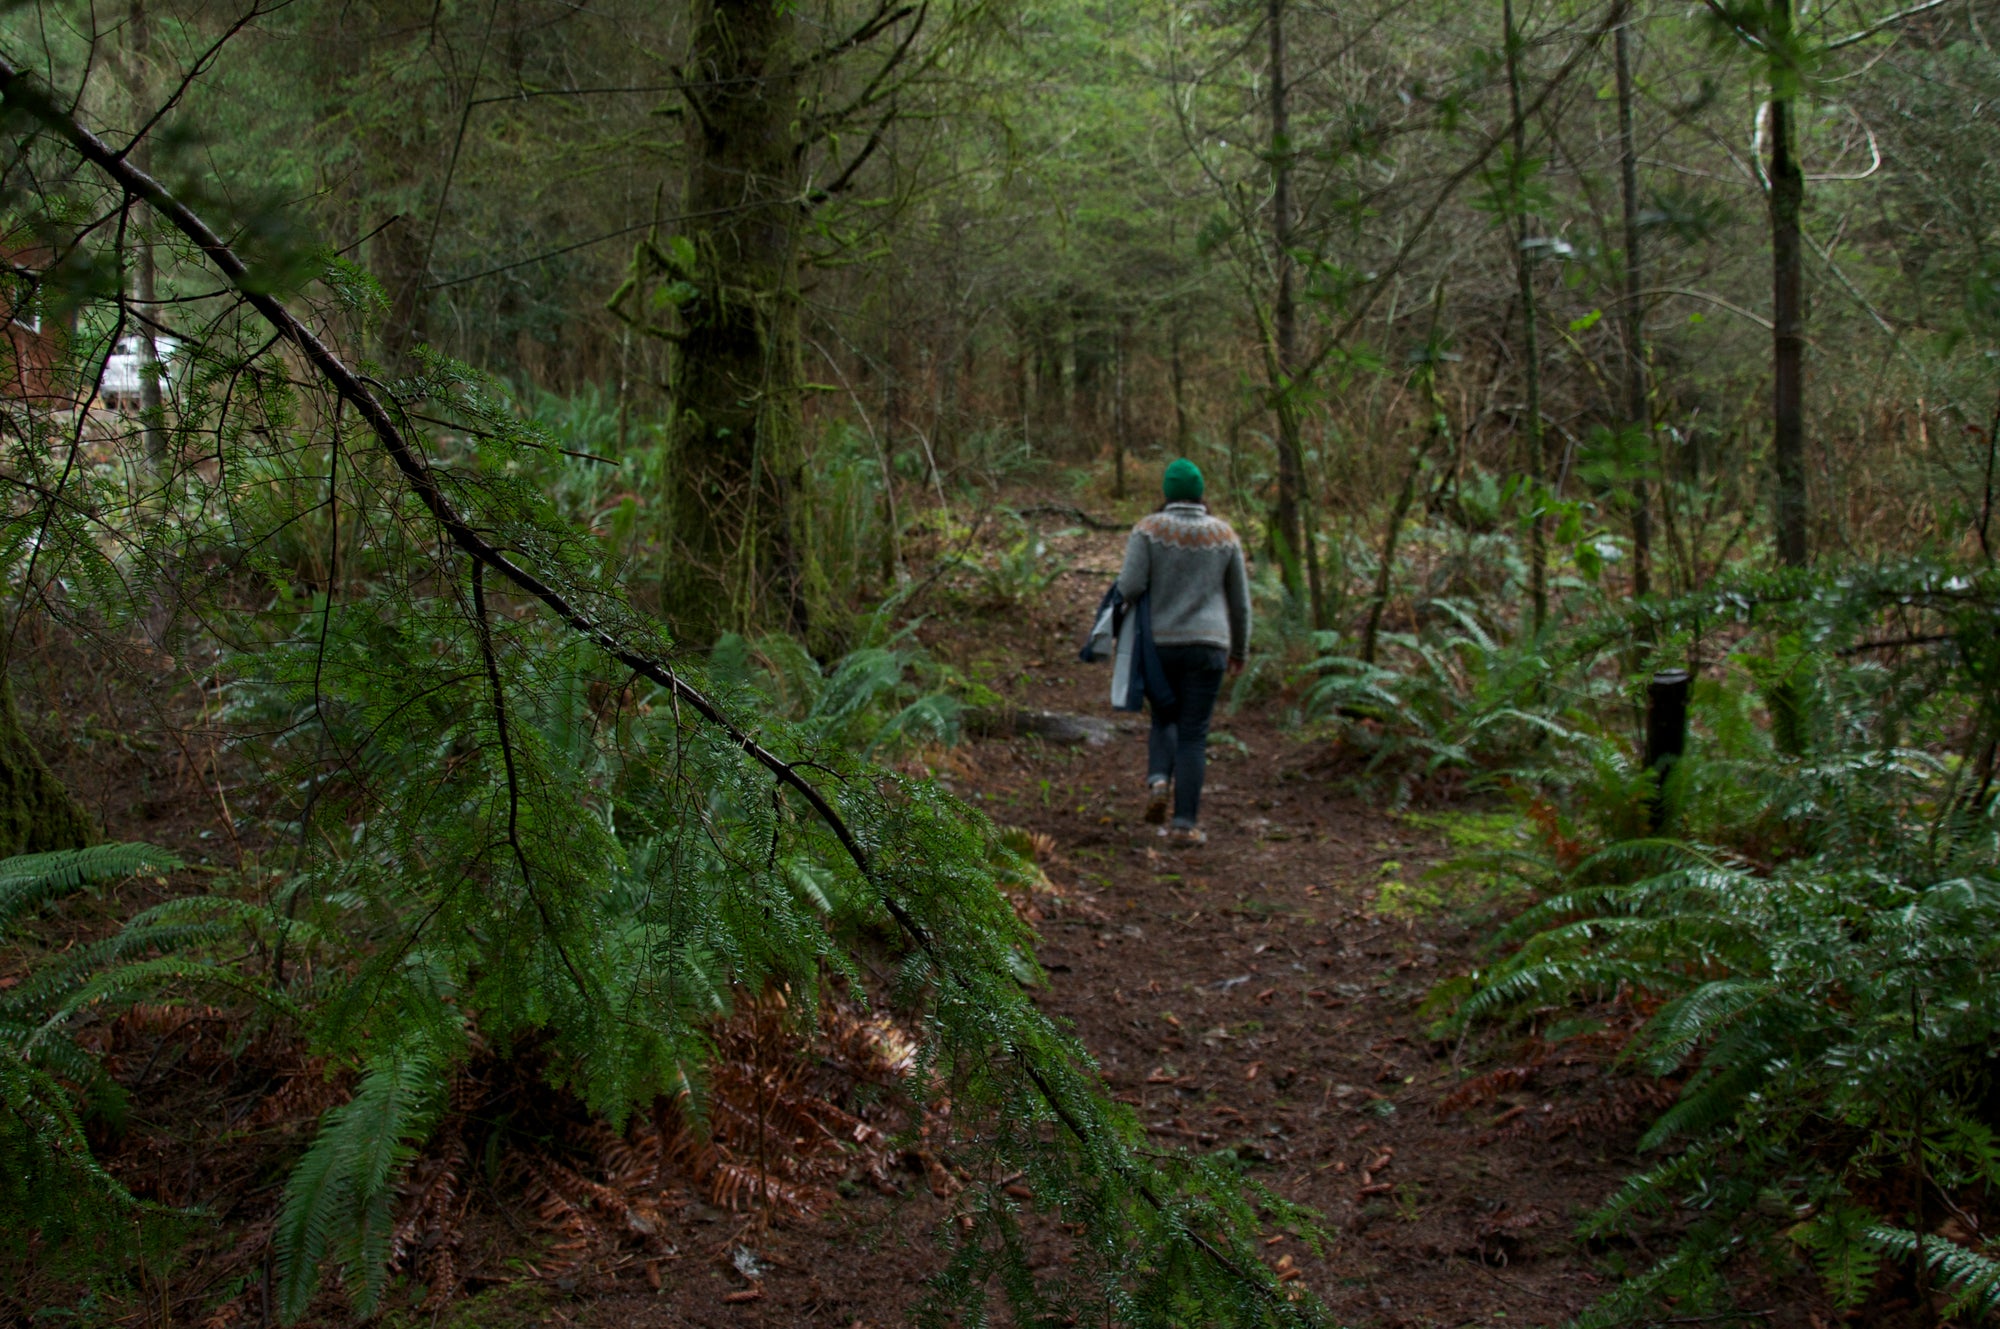 Valerie from Walnut Studiolo walking up an Oregon coastal forest trail that is lush and green with ferns and conifers